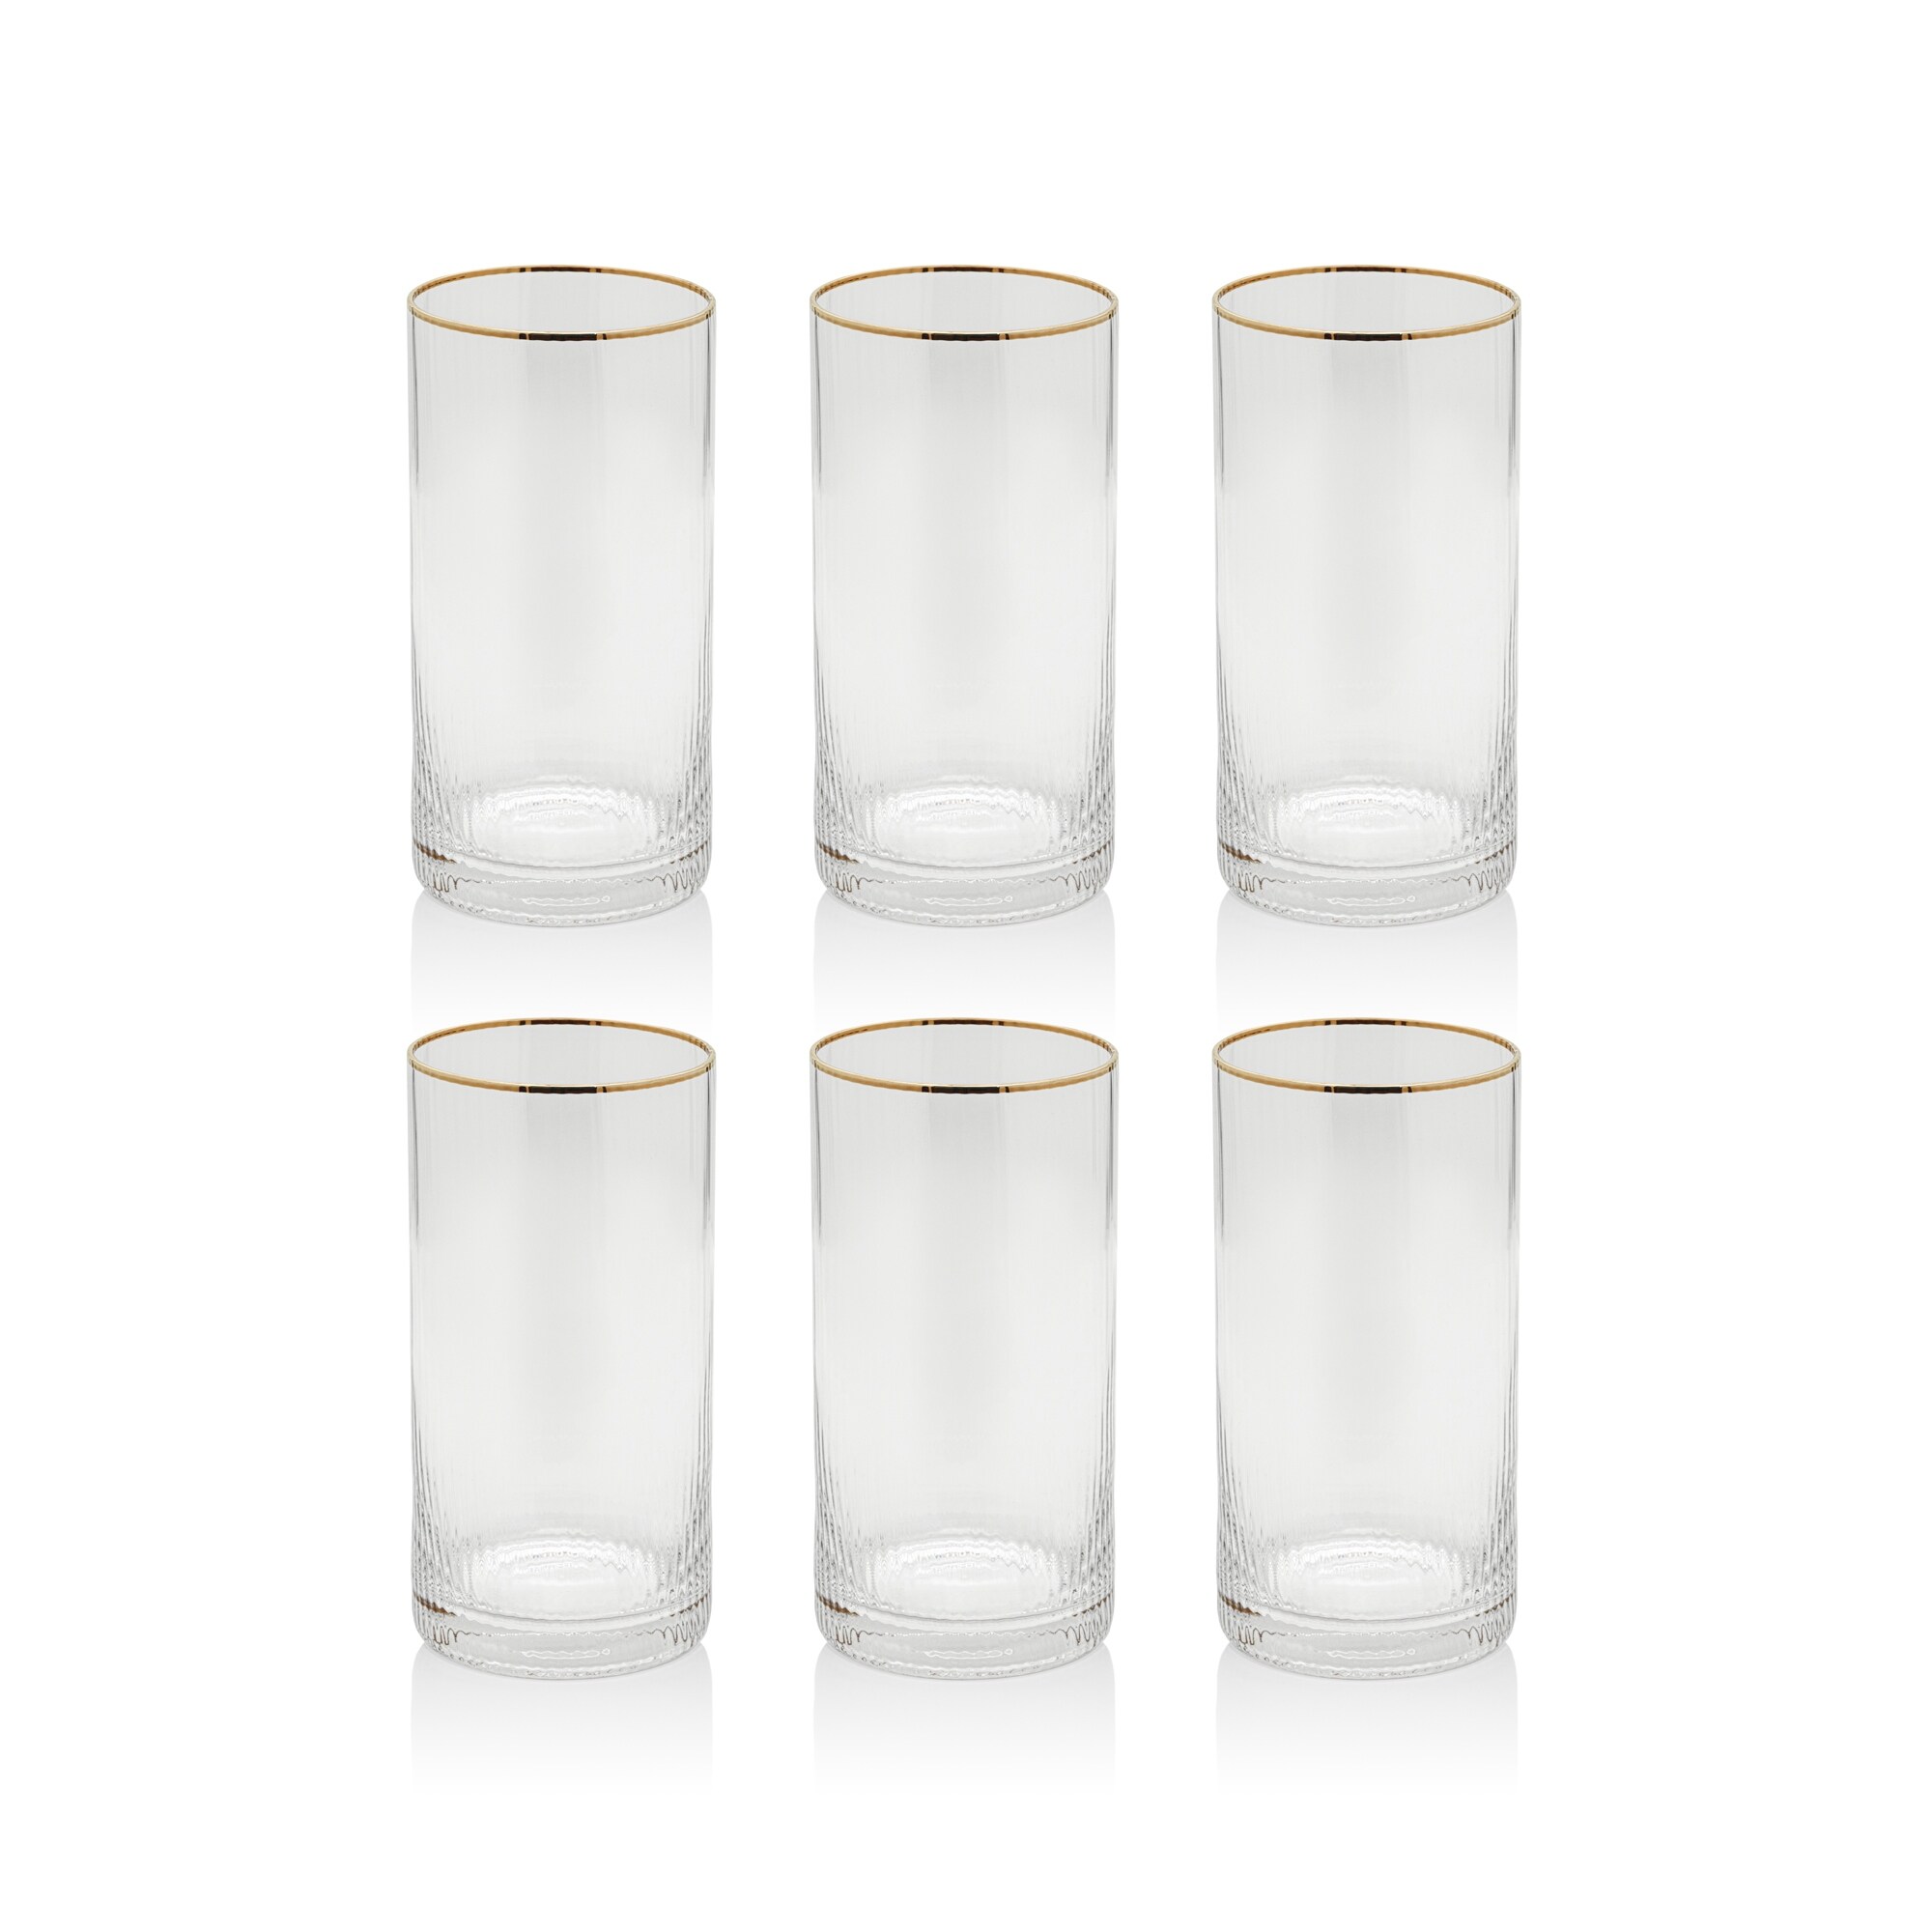 https://ak1.ostkcdn.com/images/products/is/images/direct/b92050ac8cbe7c1f70a6ad1d740d2e3c537c55b3/Optic-Highball-Glasses-with-Gold-Rim%2C-Set-of-6.jpg